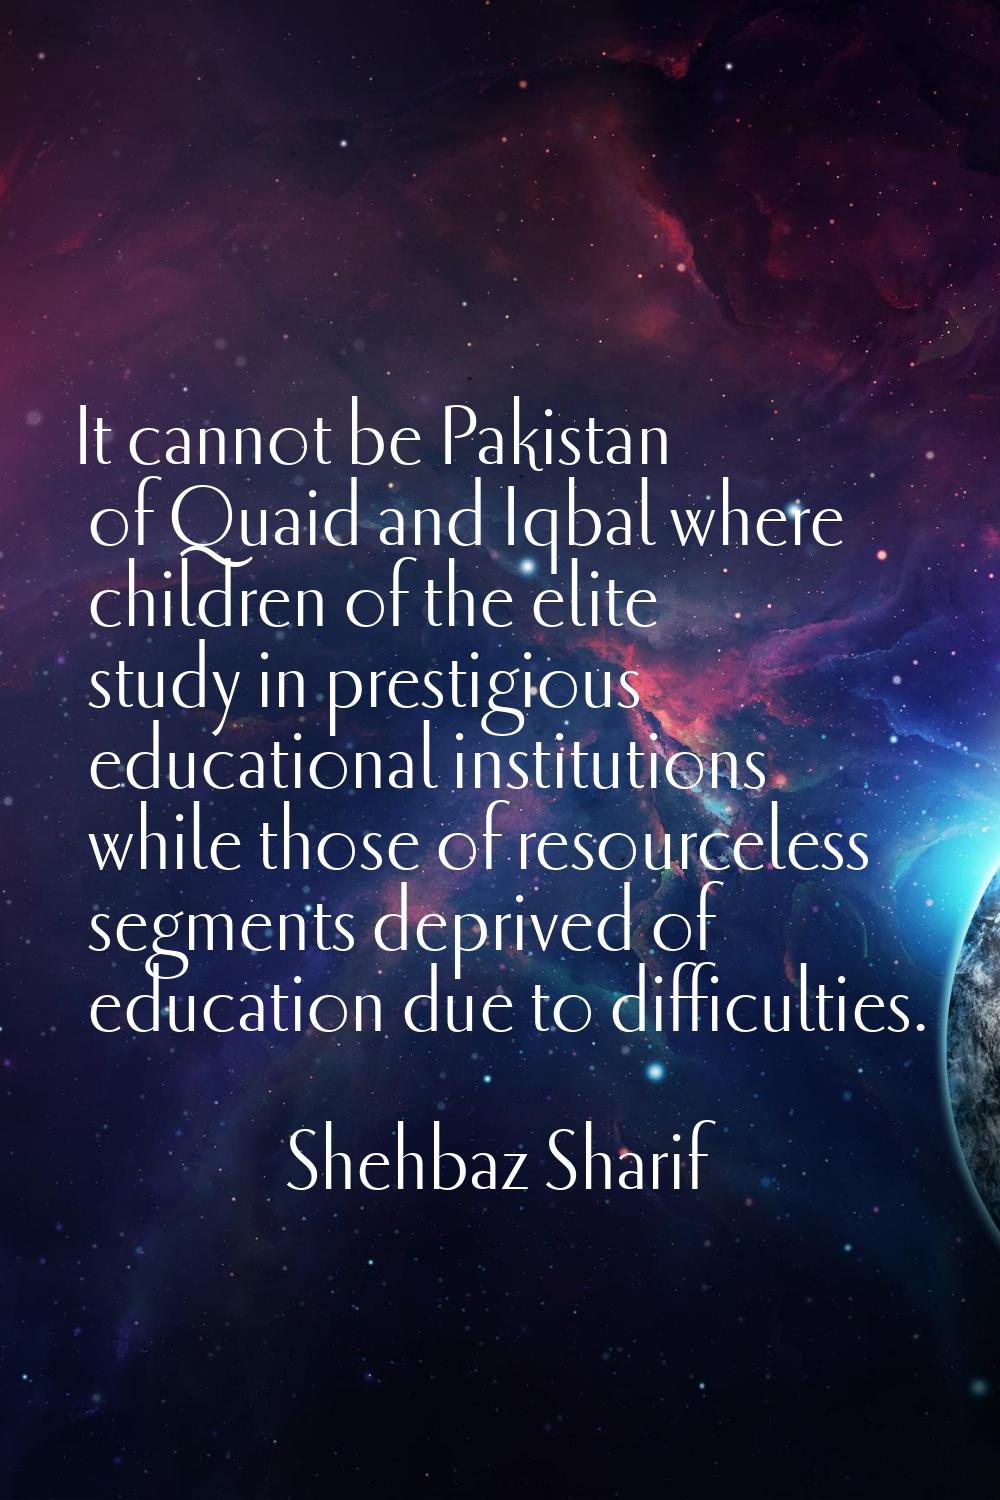 It cannot be Pakistan of Quaid and Iqbal where children of the elite study in prestigious education